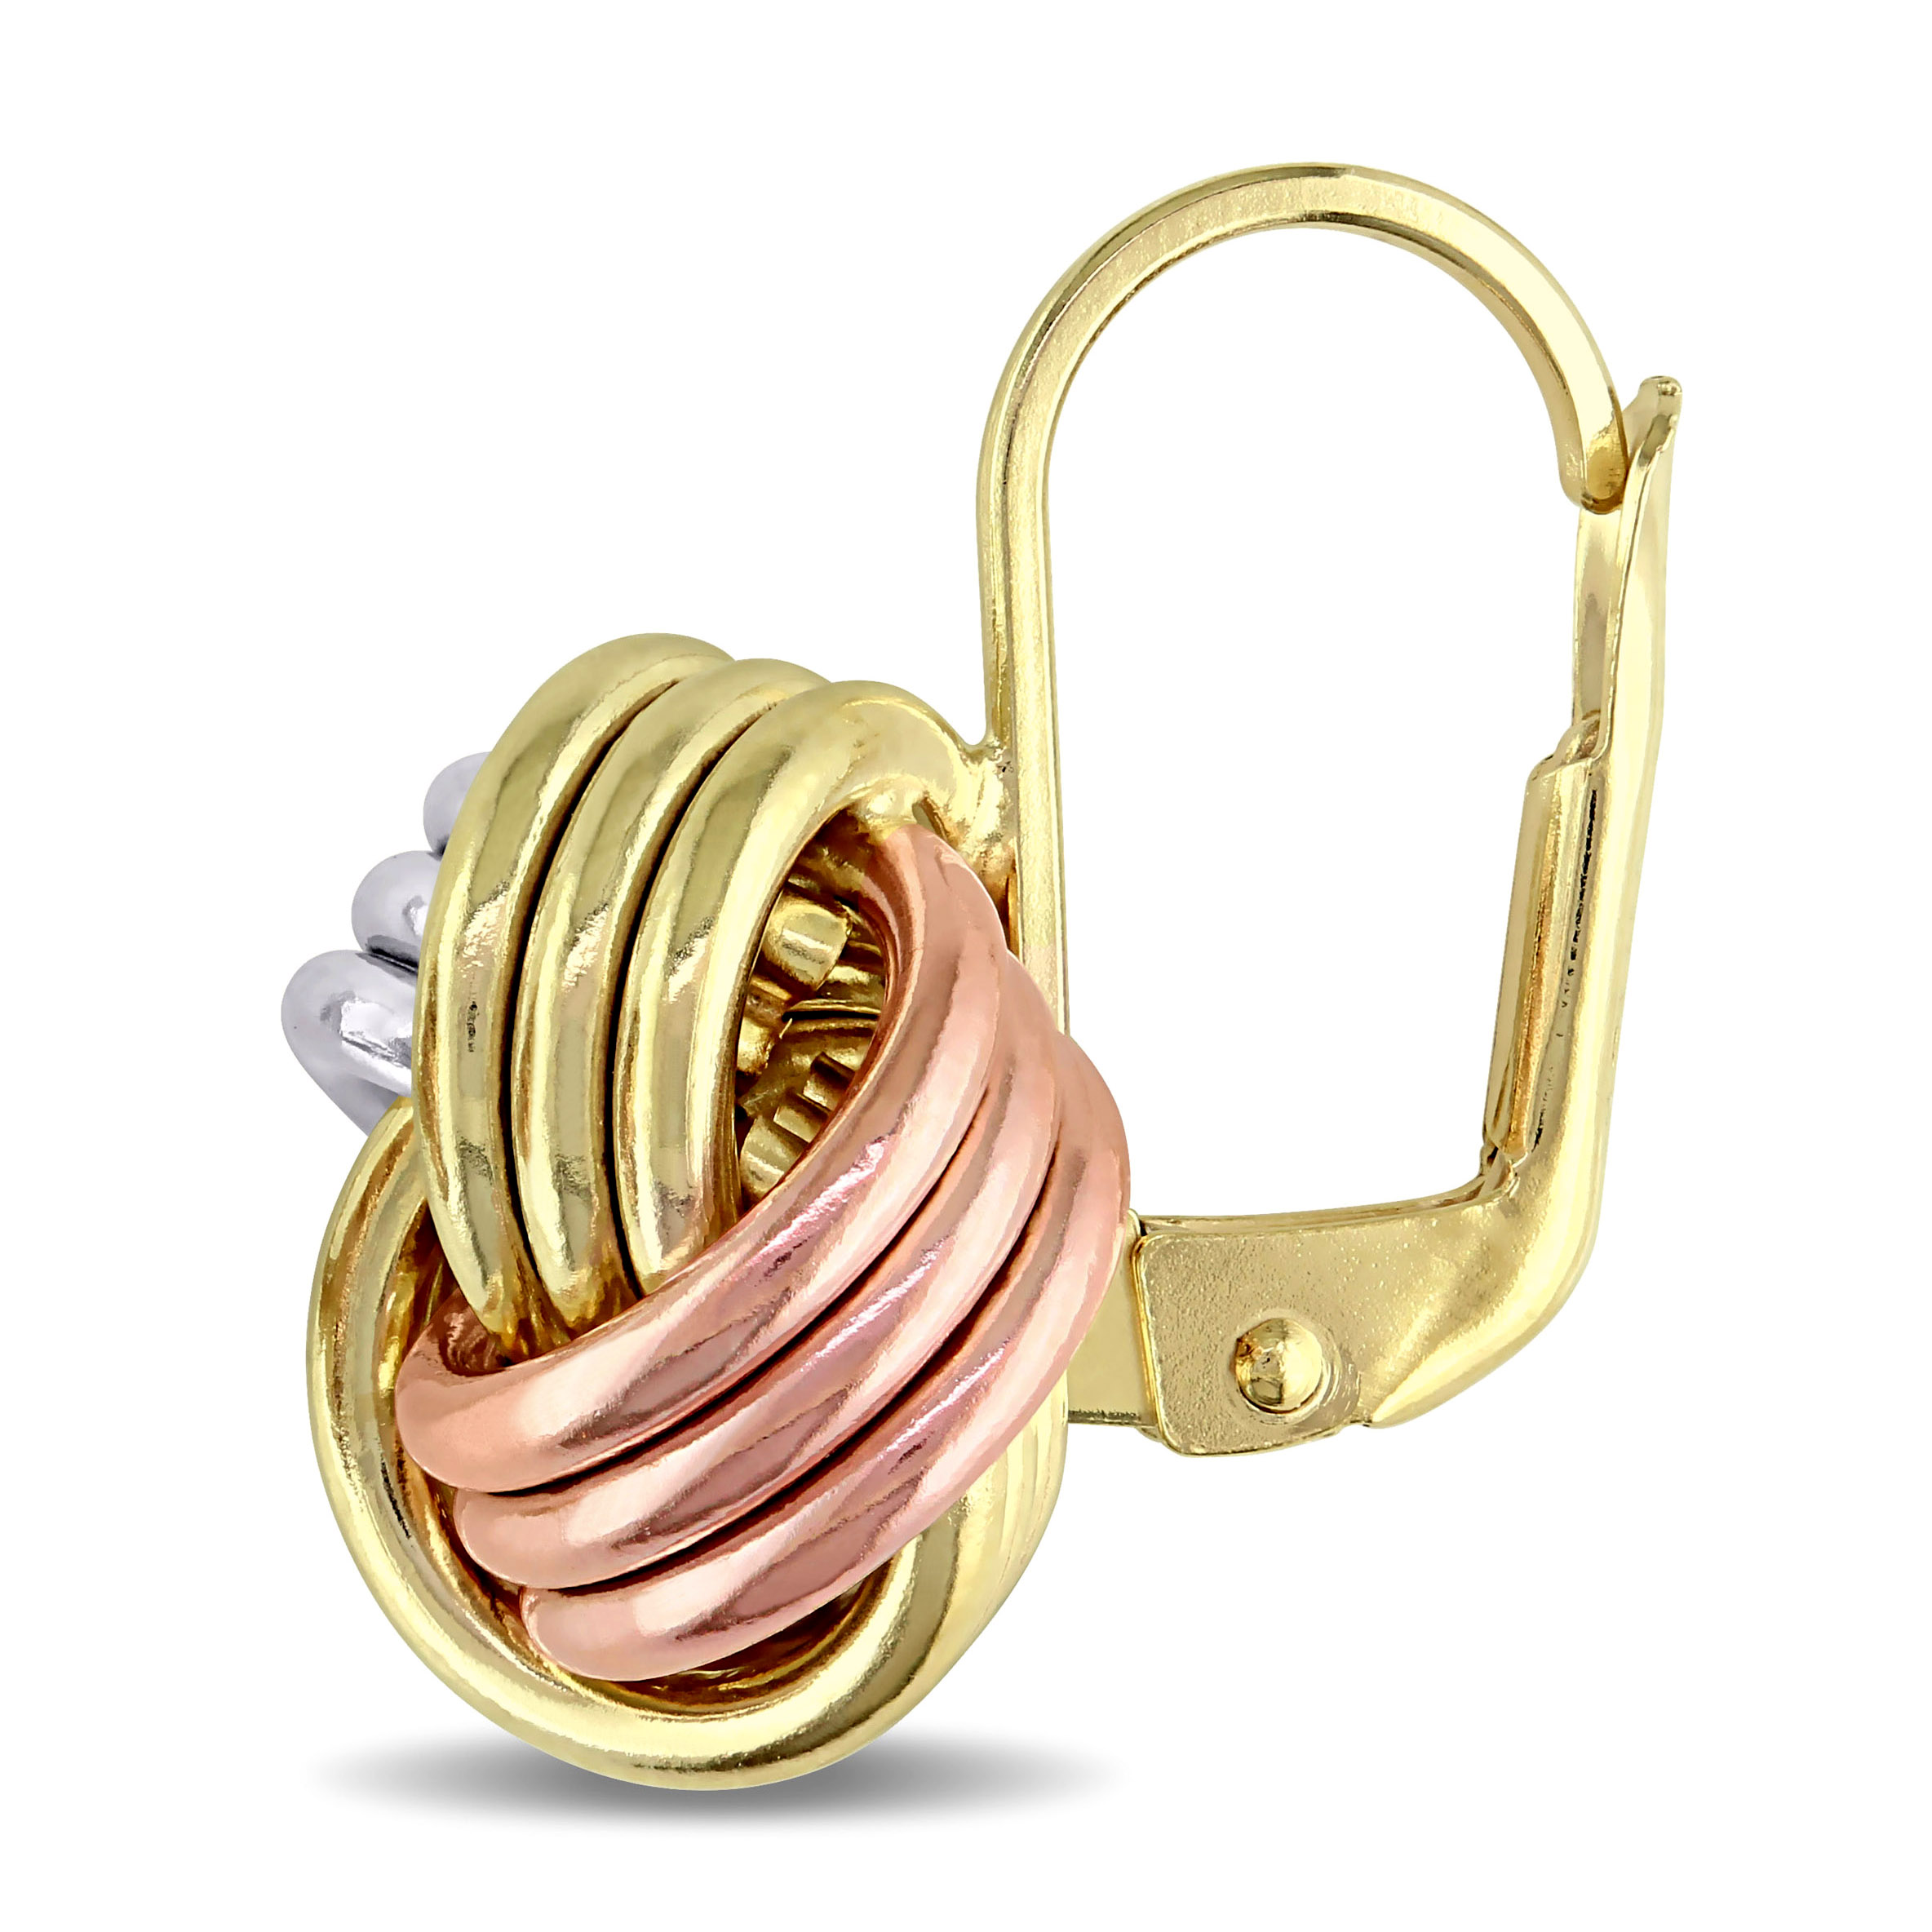 Entwined Love Knot Leverback Earrings in 3-Tone 10k Yellow, Rose and White Gold